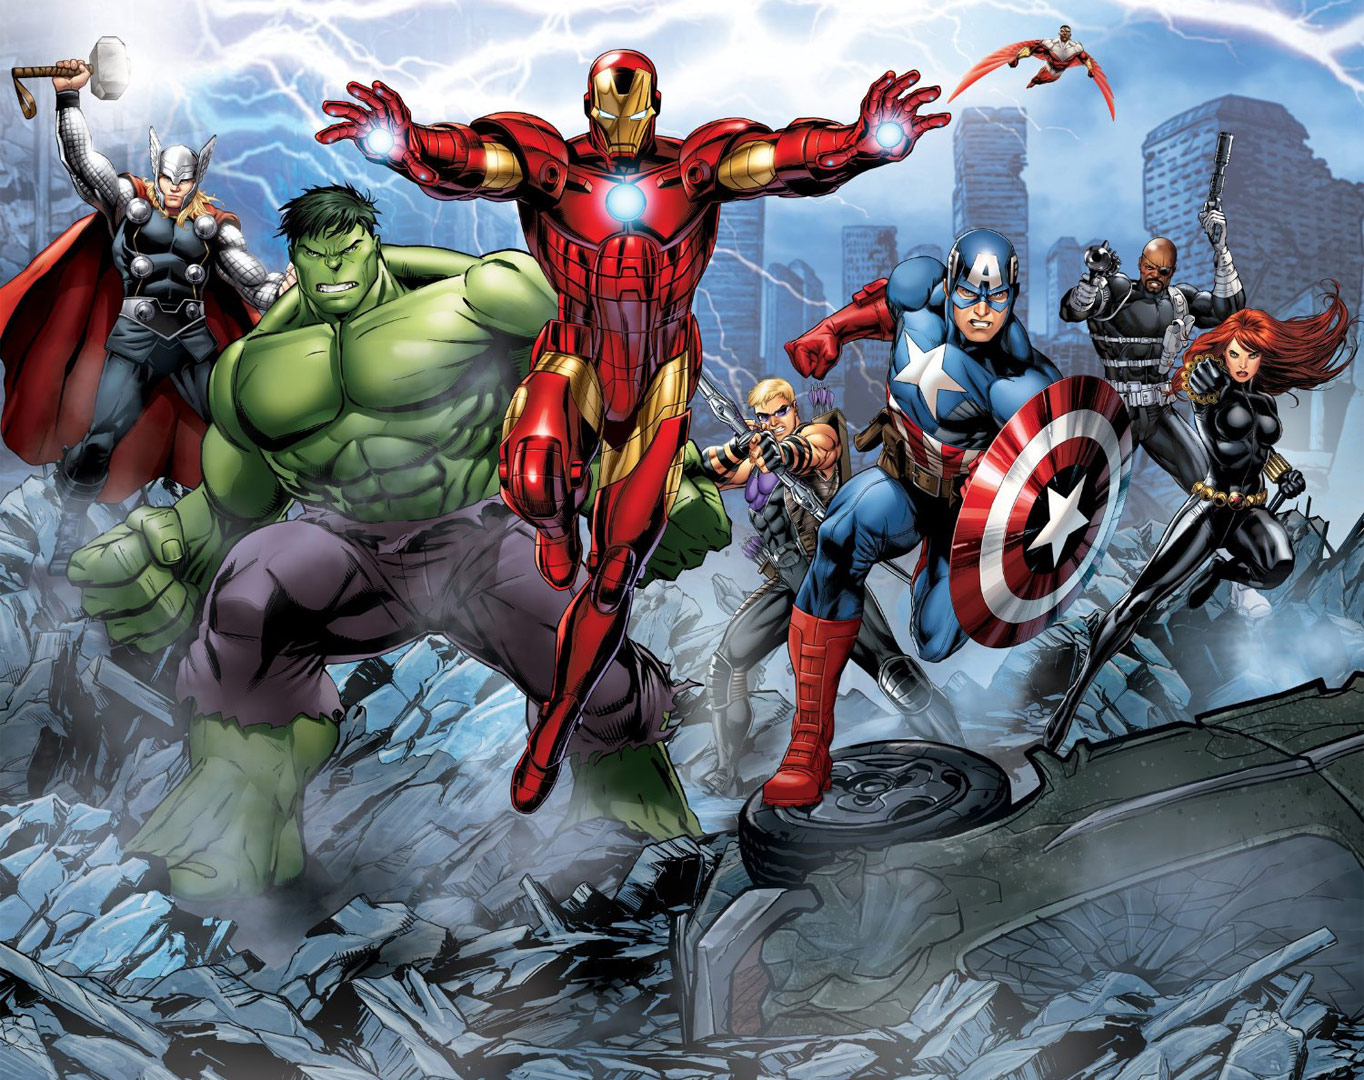 Heroes Prepare For An Epic Battle In Your Home With The Avengers